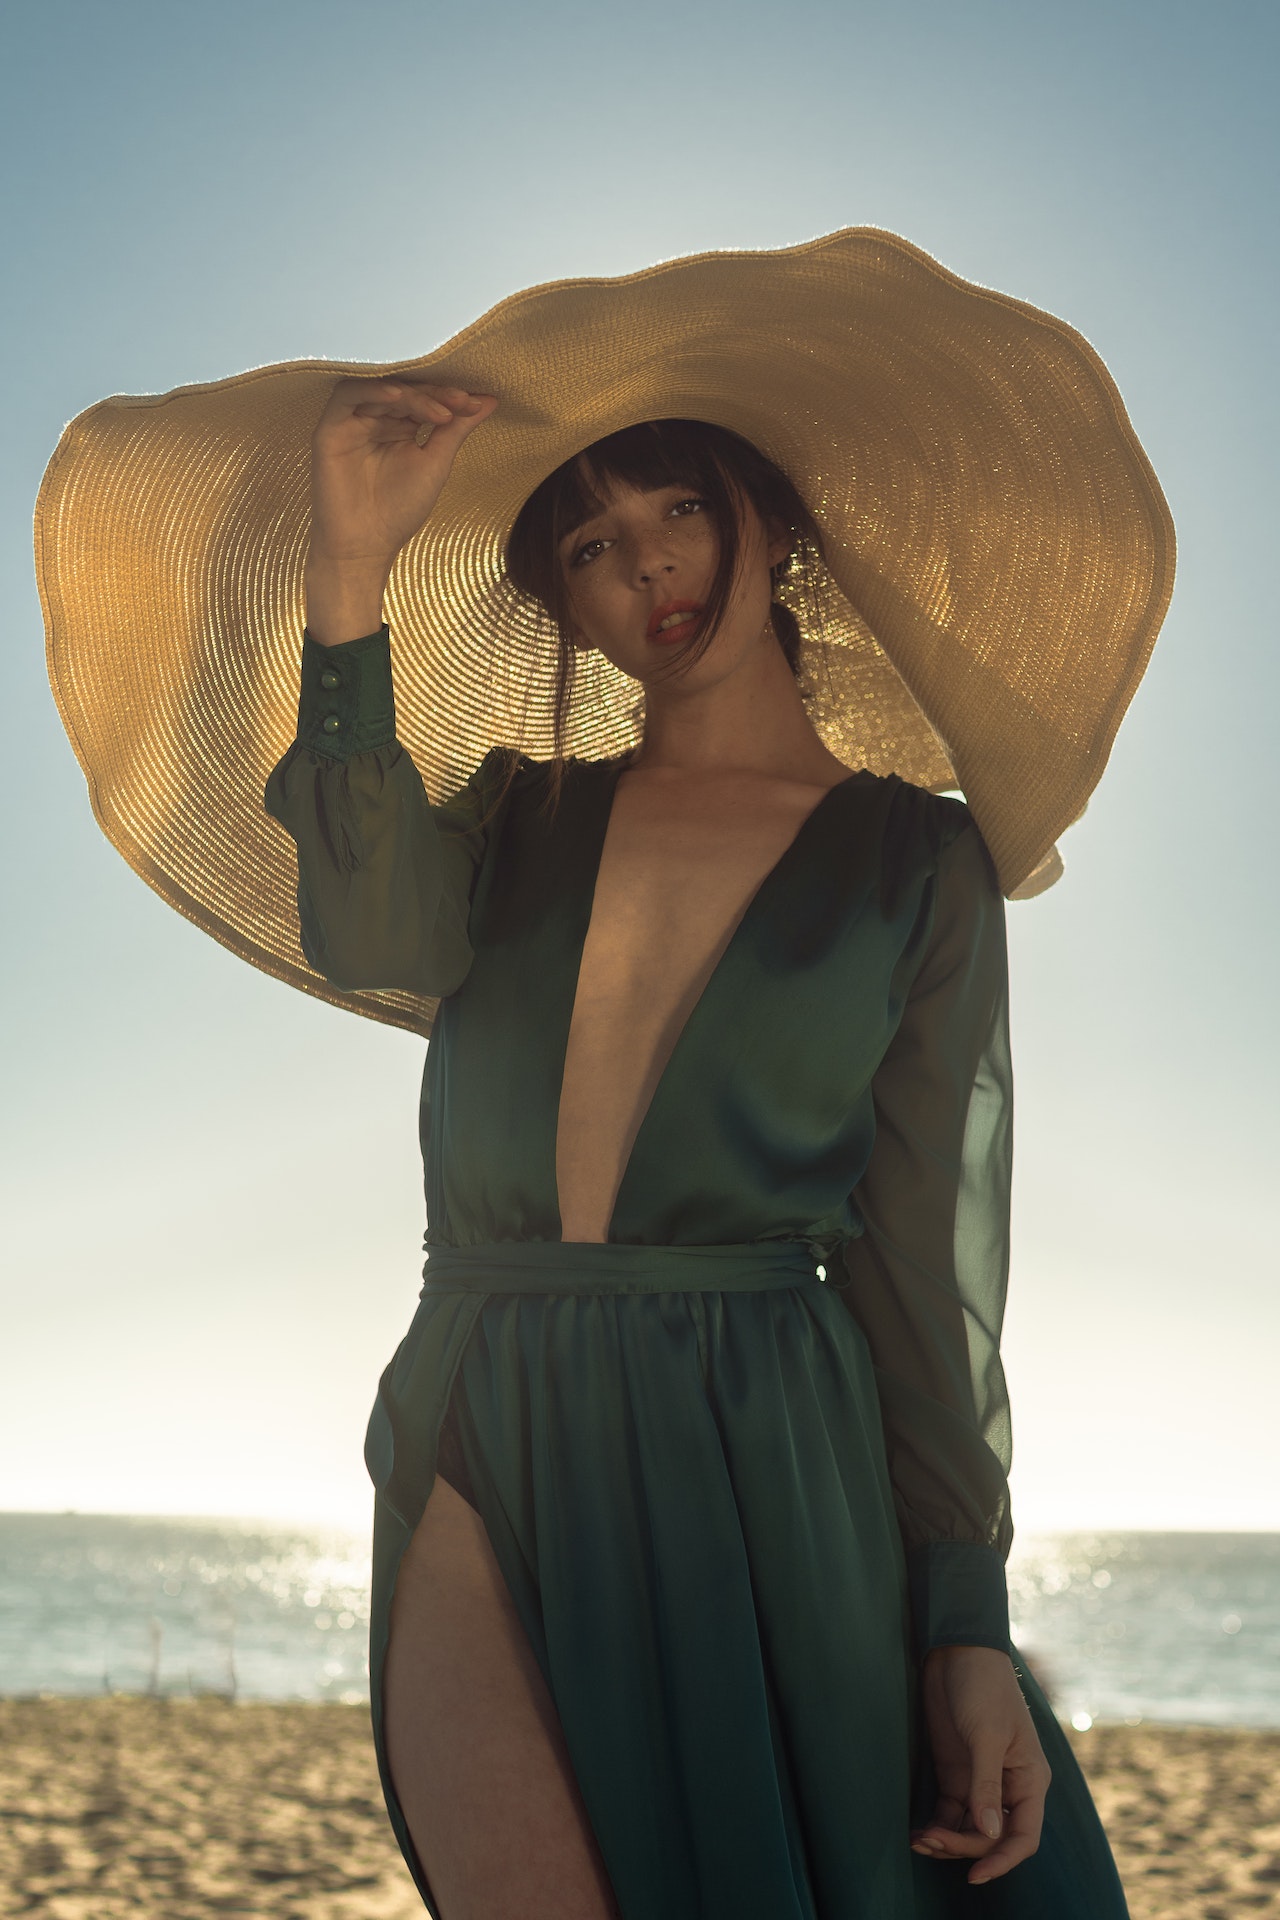 Woman is wearing a green dress and hat